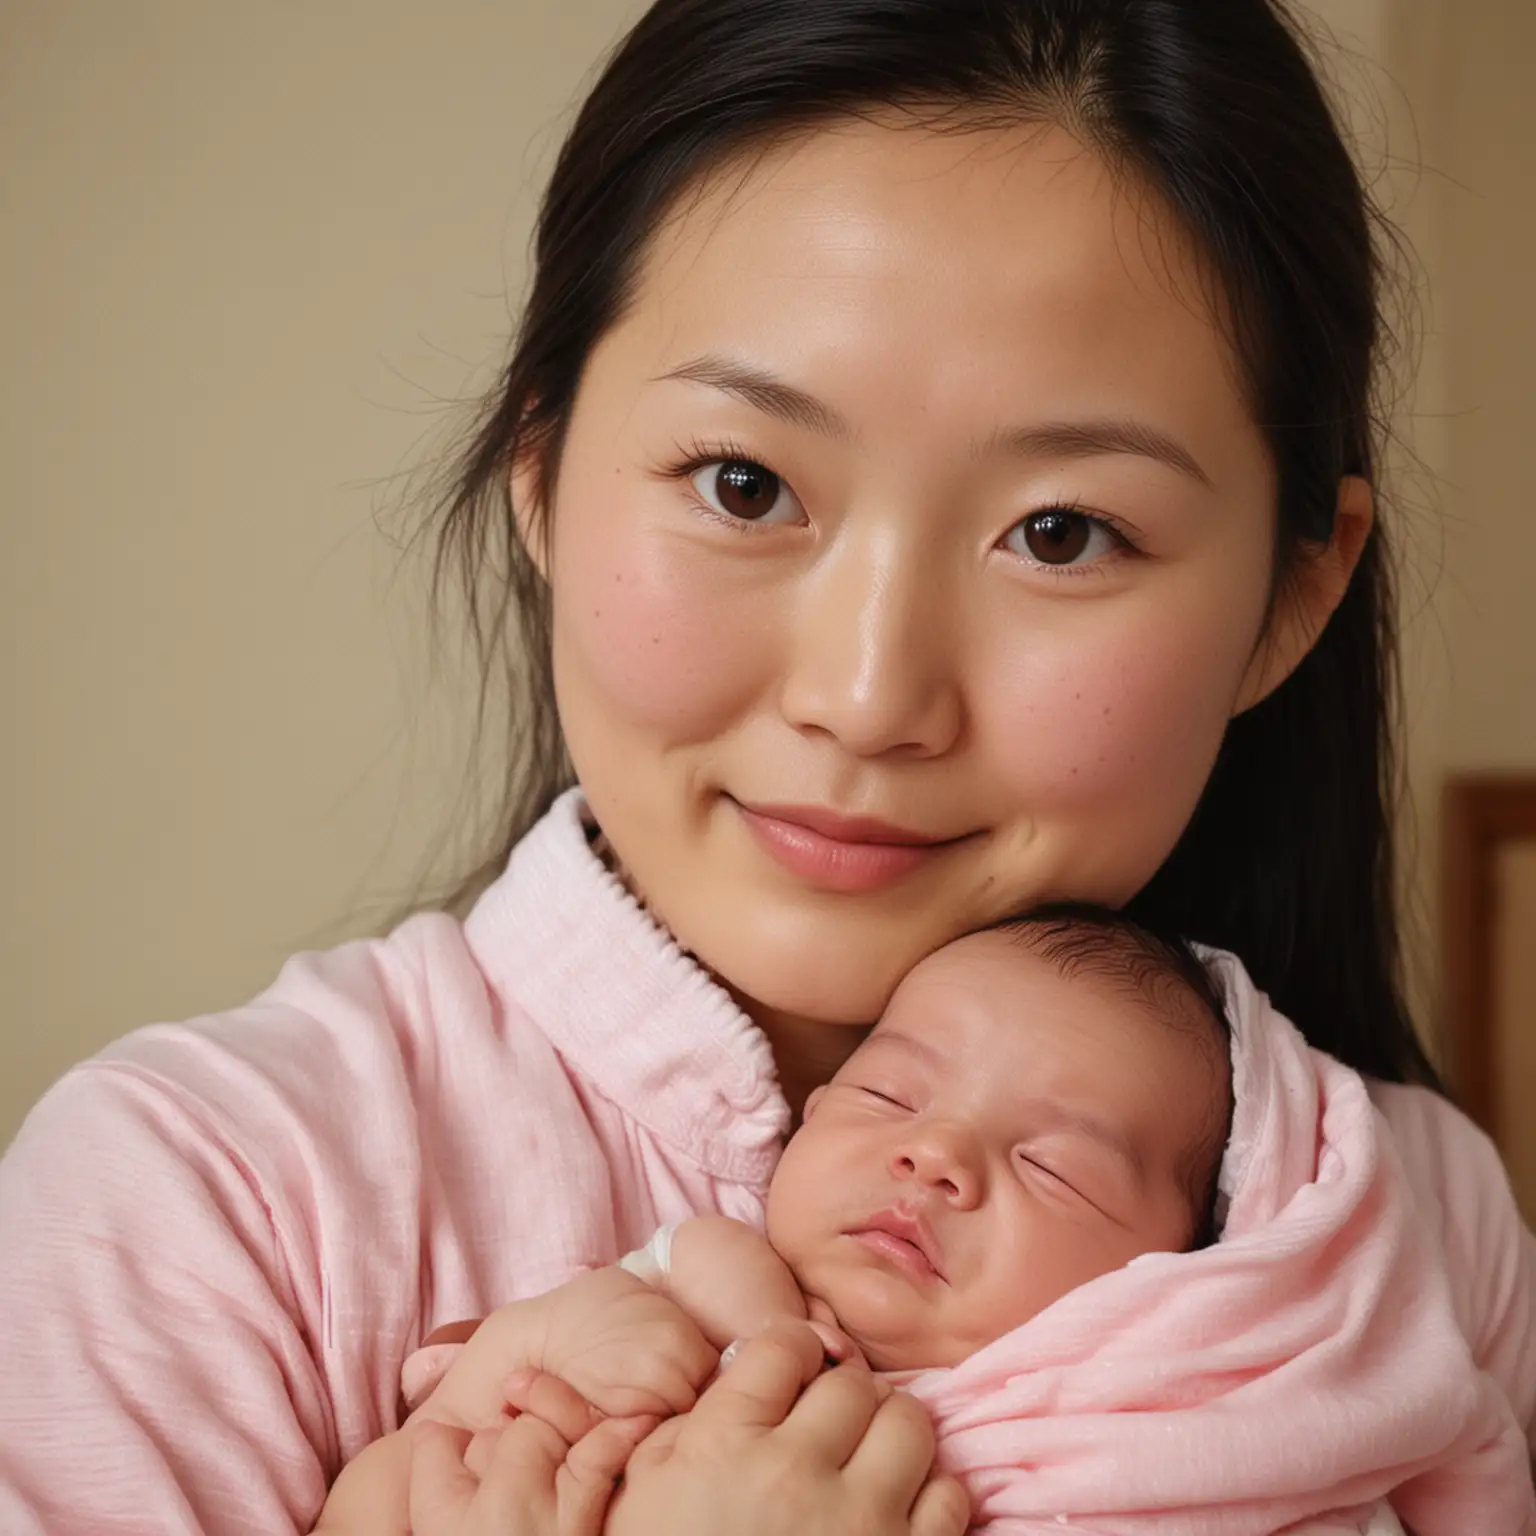 Chinese-Nanny-Holding-1MonthOld-Baby-Heartwarming-Childcare-Moment